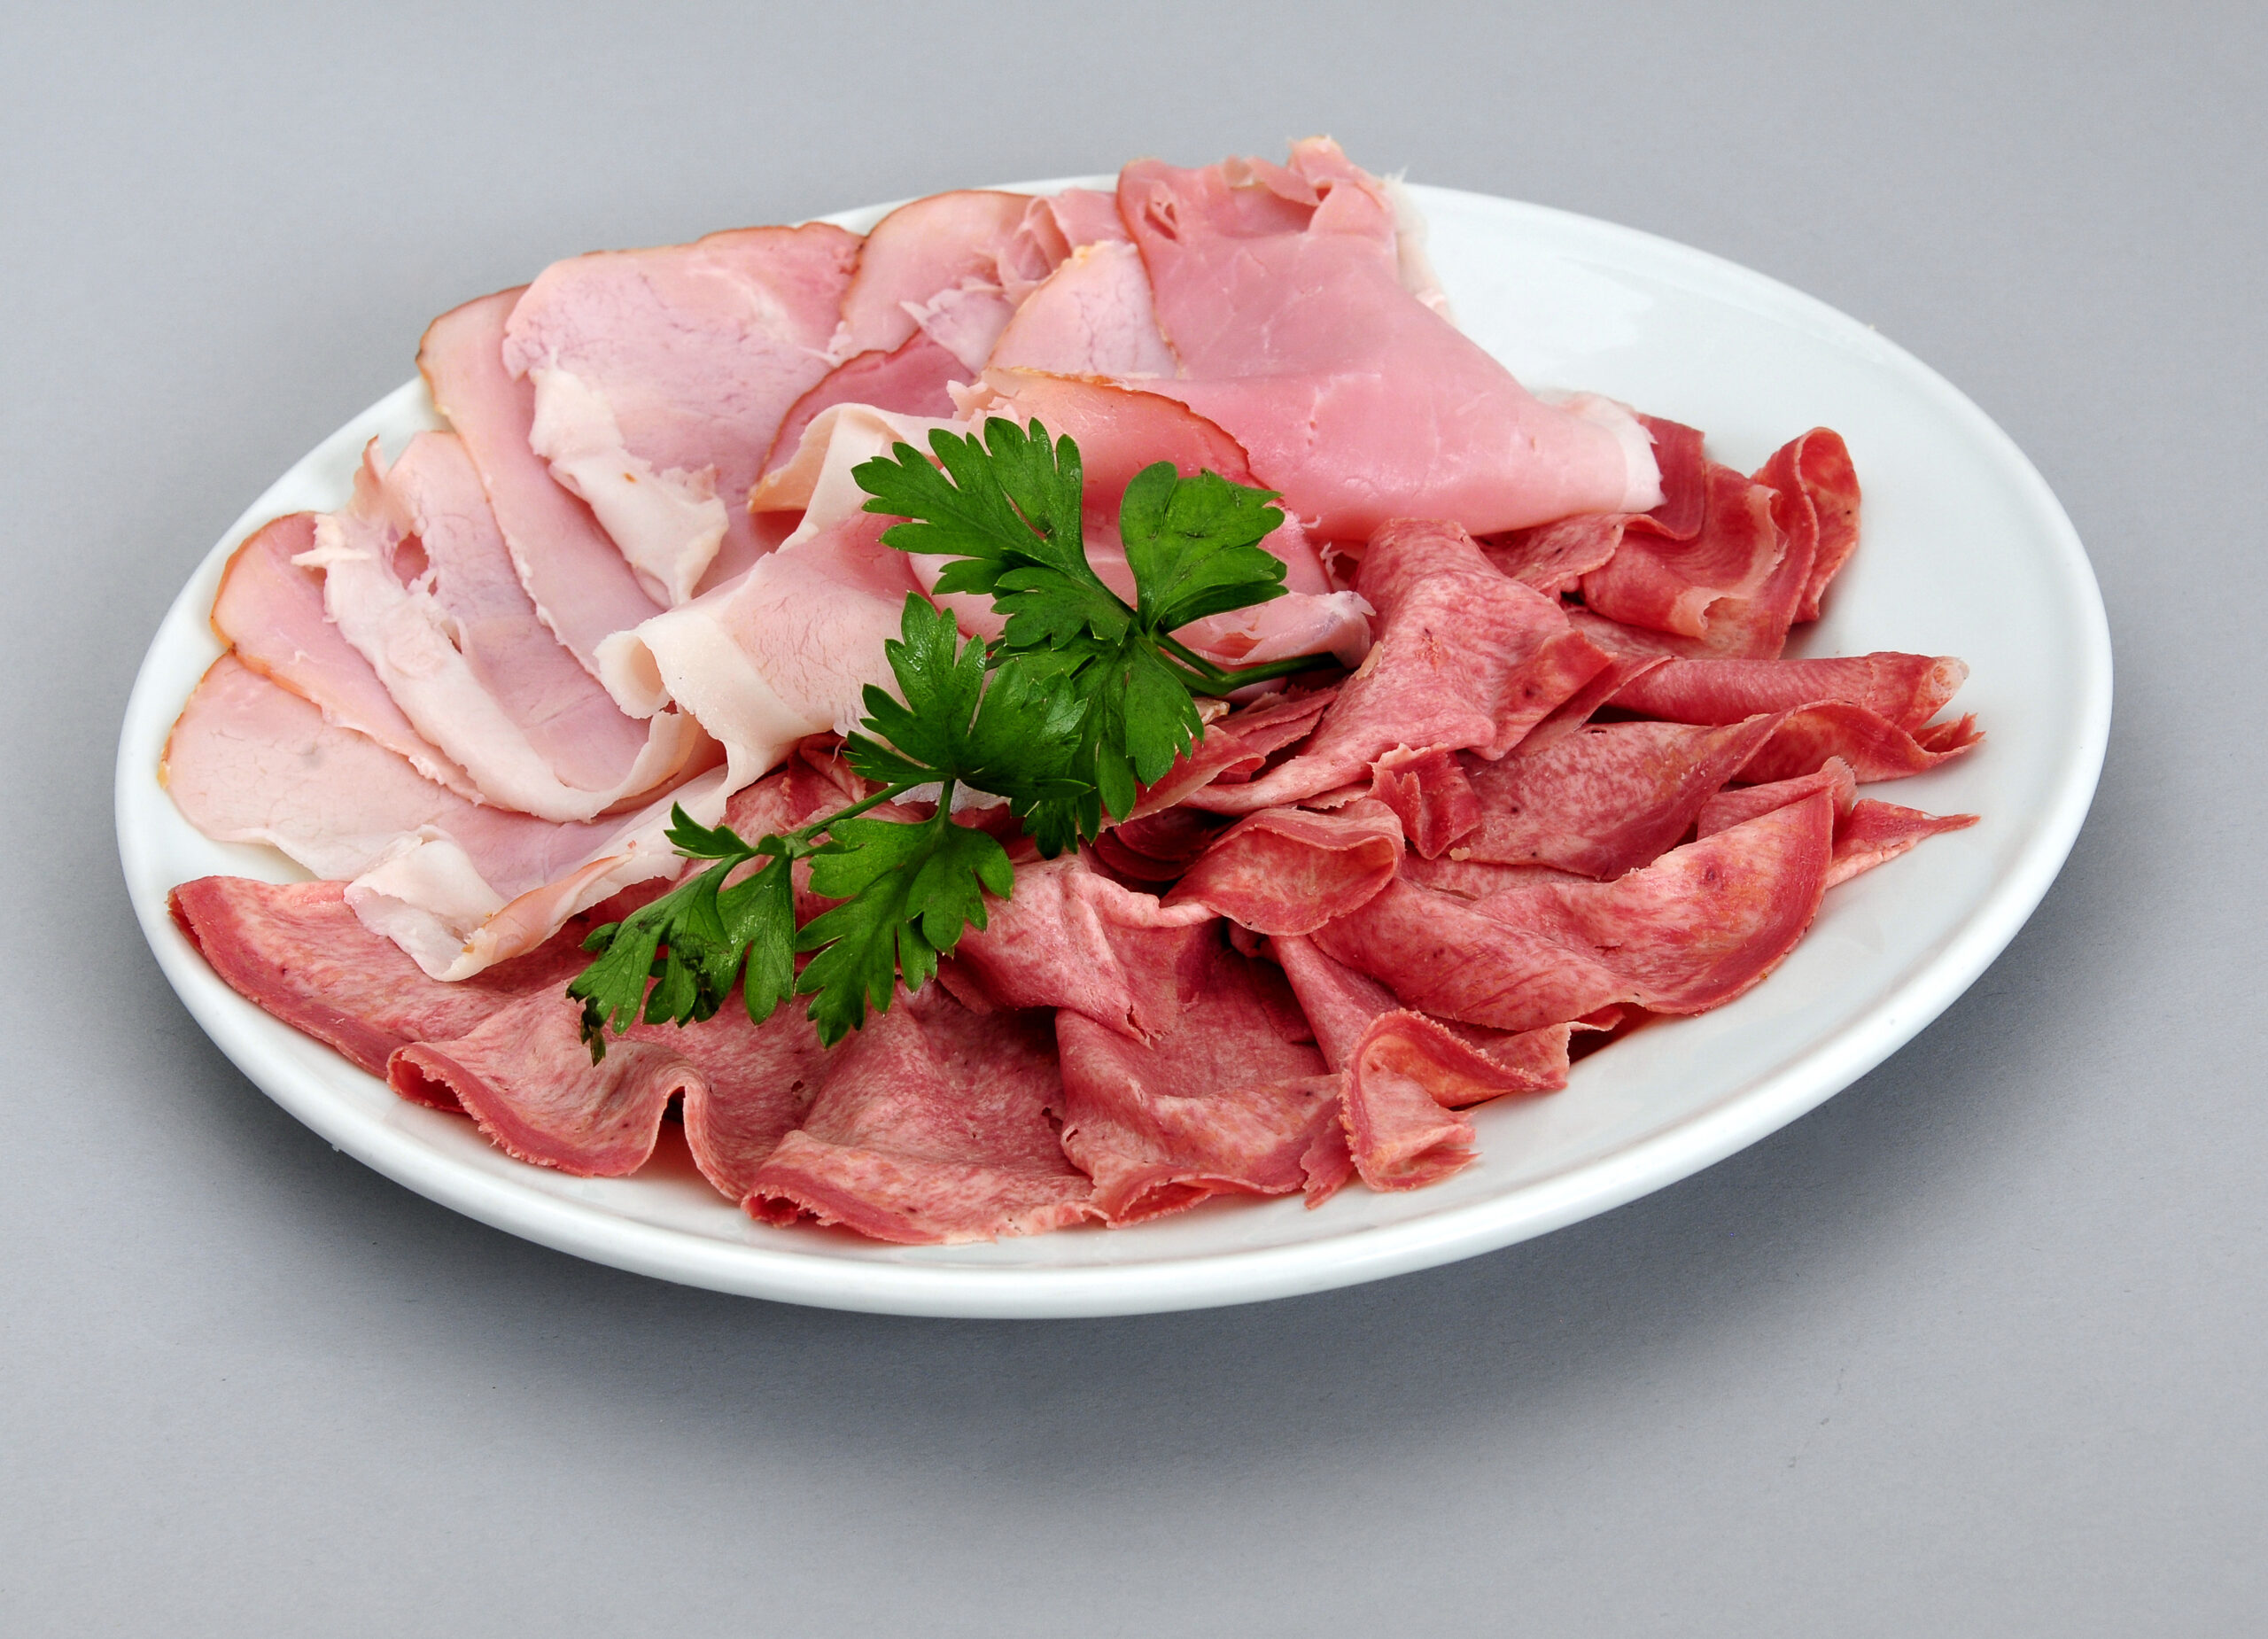 How many calories are in one slice of lunch meat ham